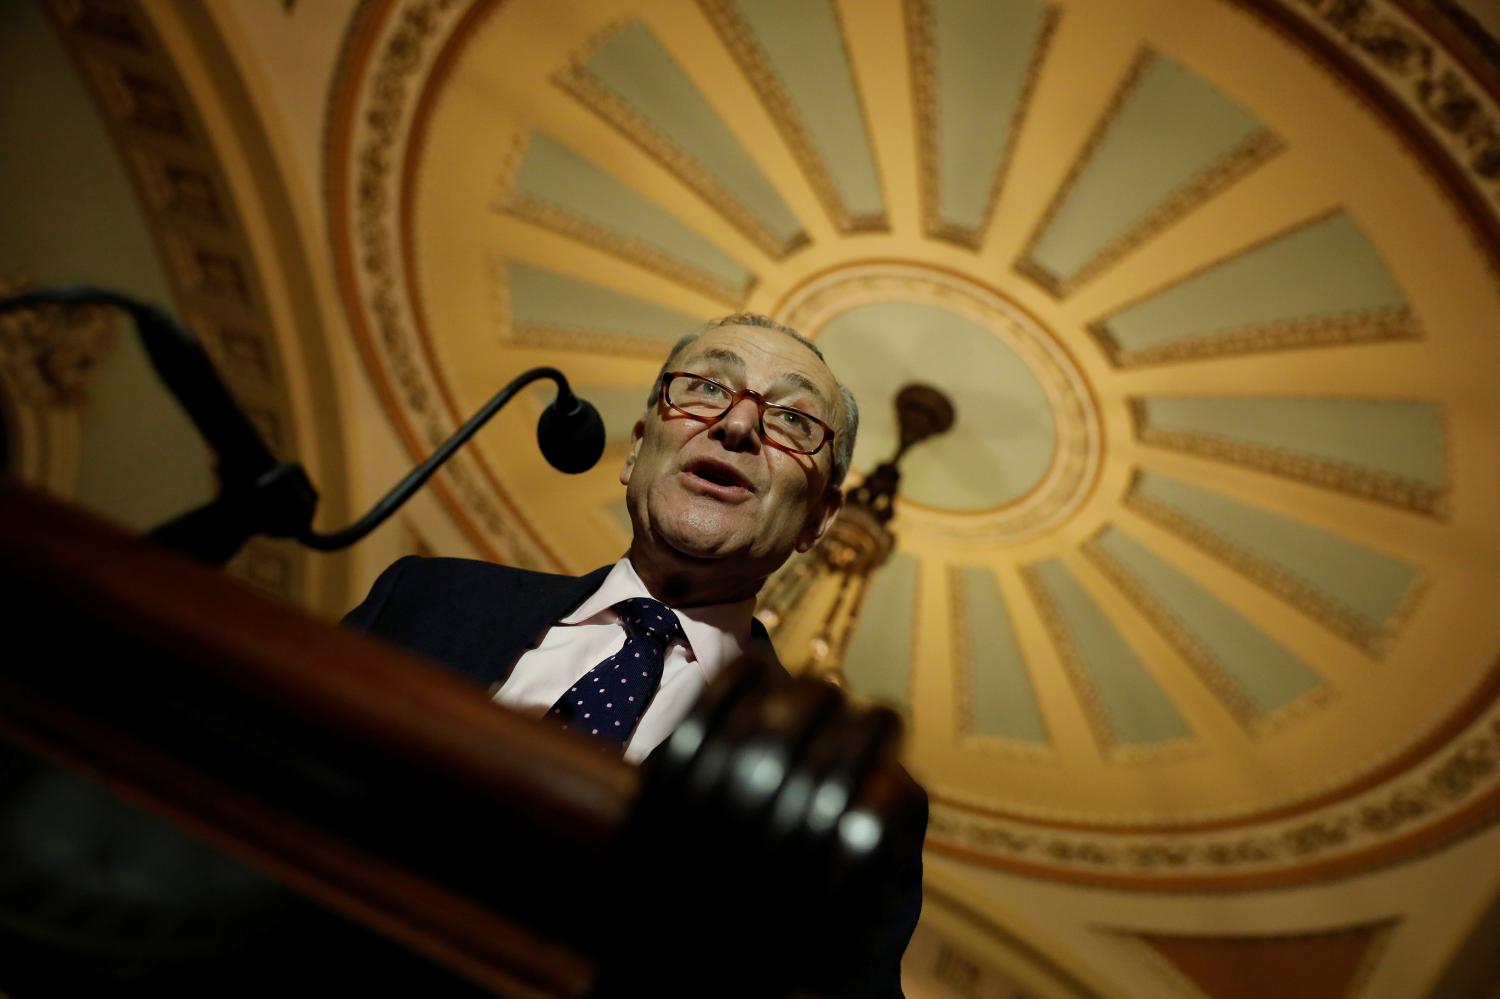 Senate Minority Leader Chuck Schumer speaks about the Tax Cuts and Jobs Acts at news conference following the weekly policy luncheons at the U.S. Capitol in Washington, U.S., December 19, 2017. REUTERS/Aaron P. Bernstein